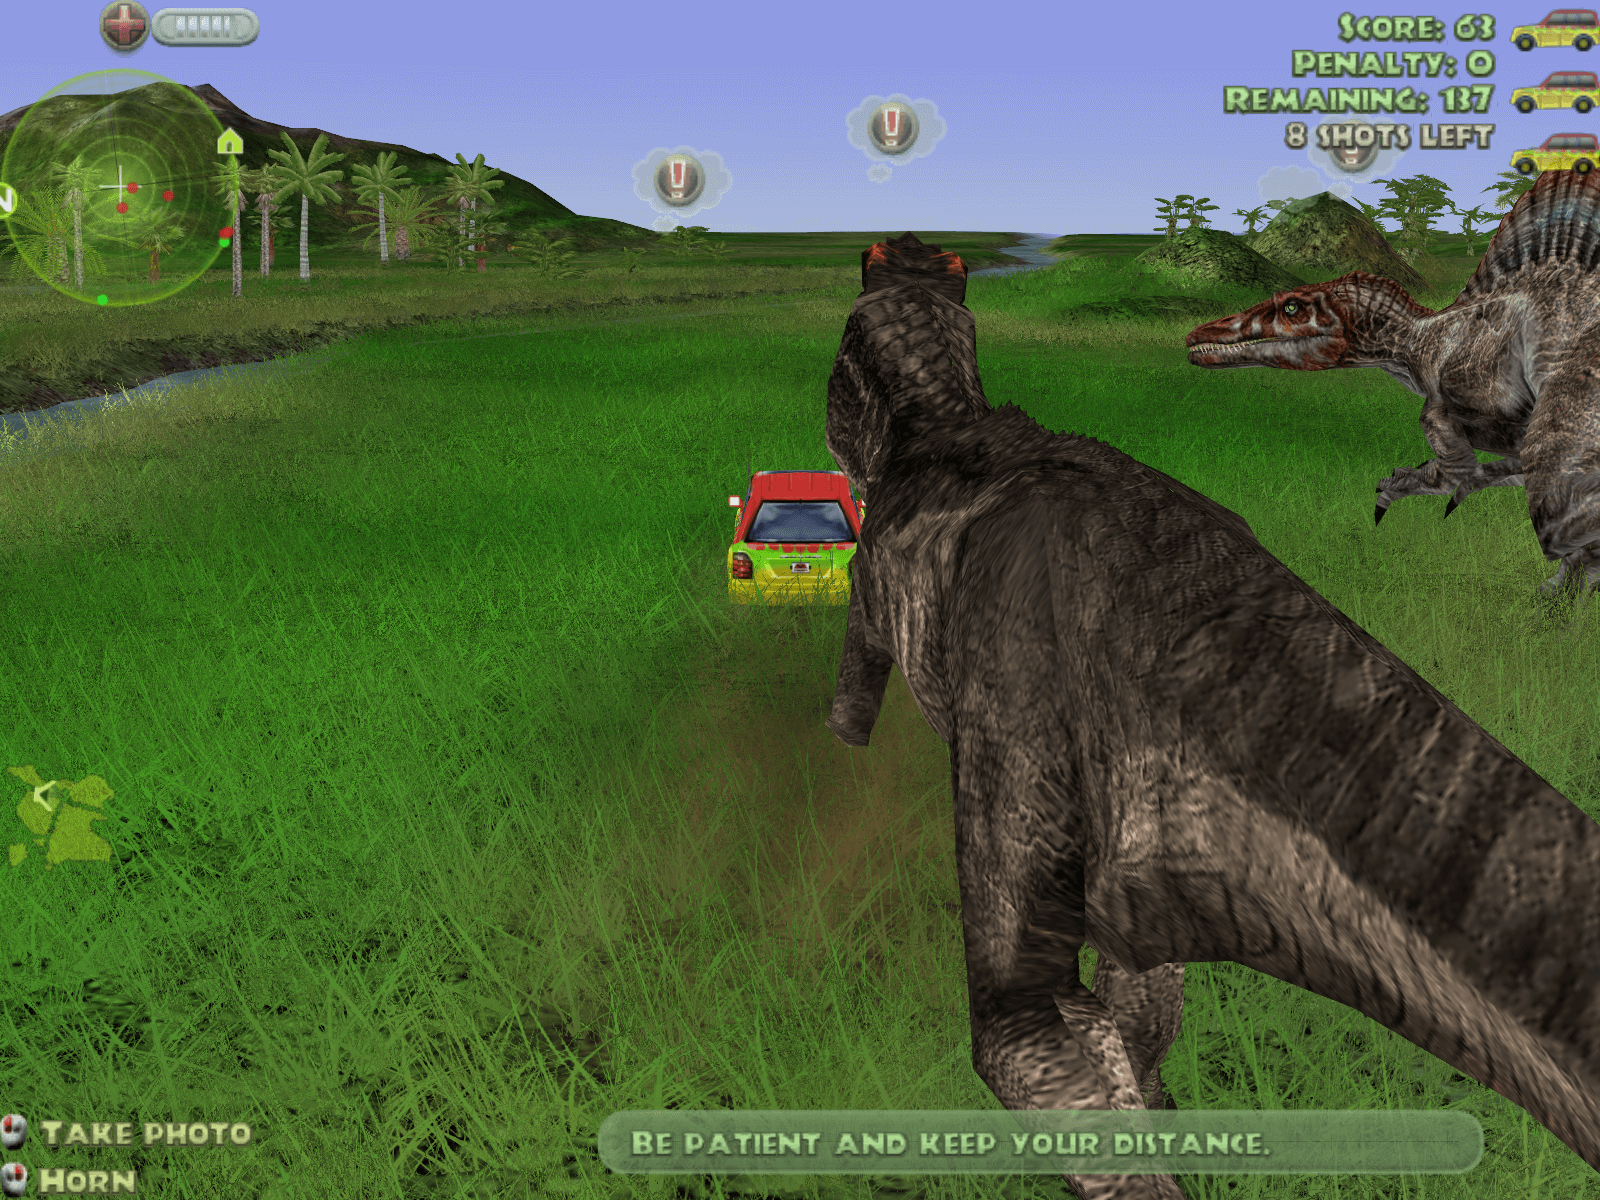 Jurassic Park The Game Free Download